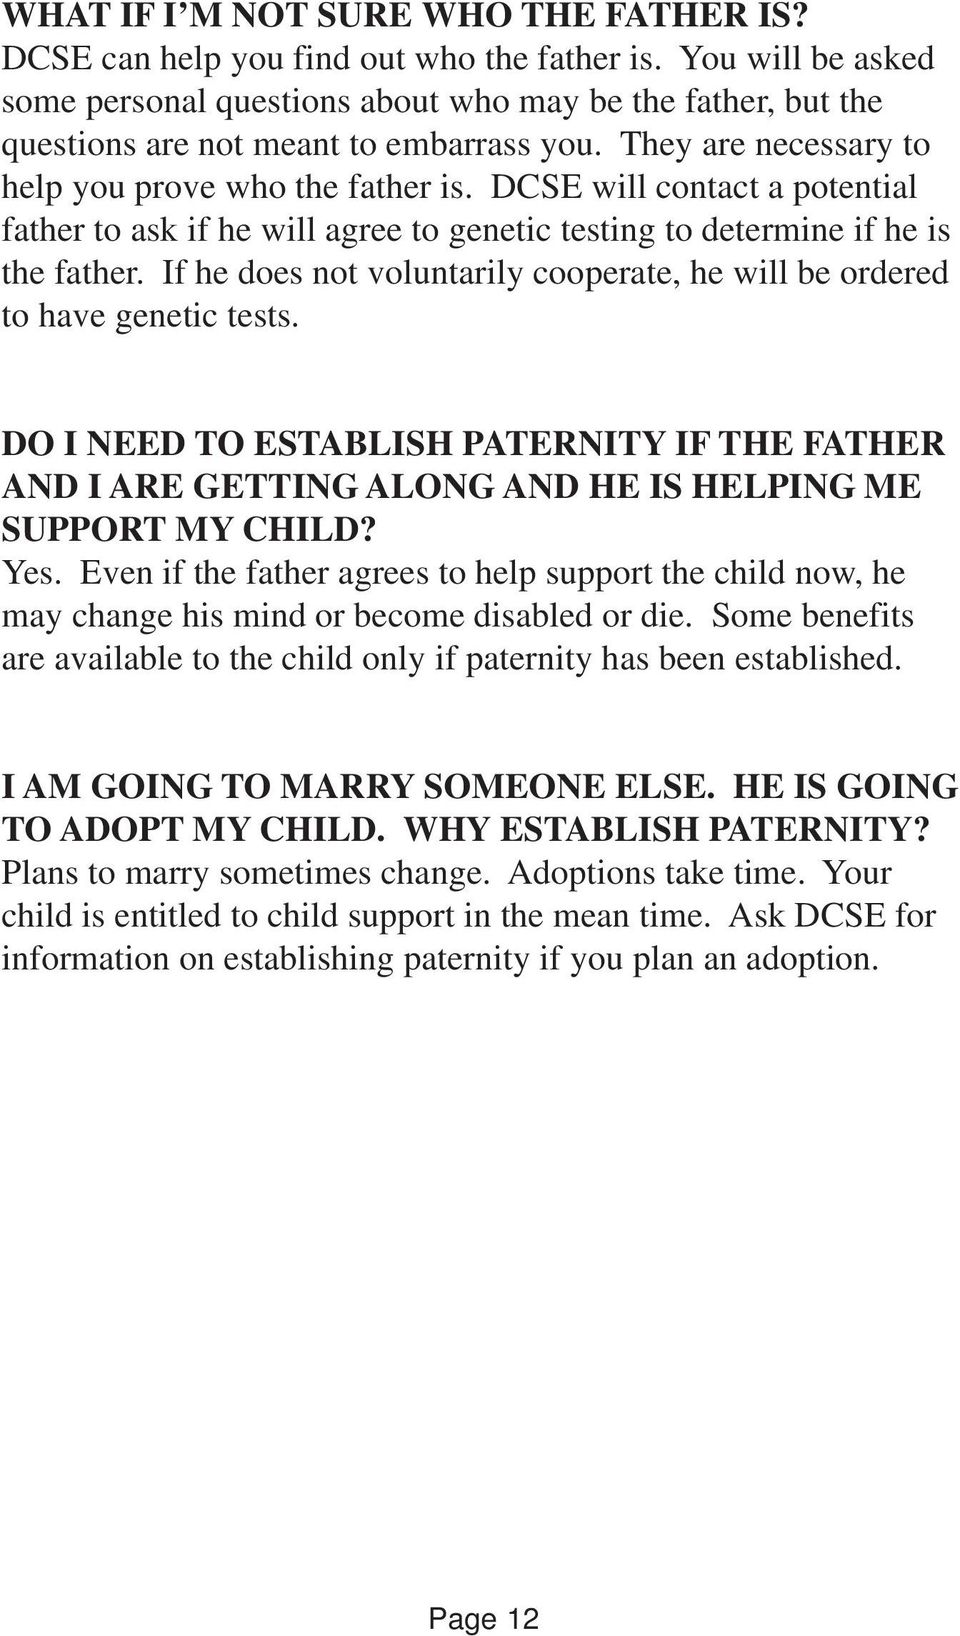 DCSE will contact a potential father to ask if he will agree to genetic testing to determine if he is the father. If he does not voluntarily cooperate, he will be ordered to have genetic tests.